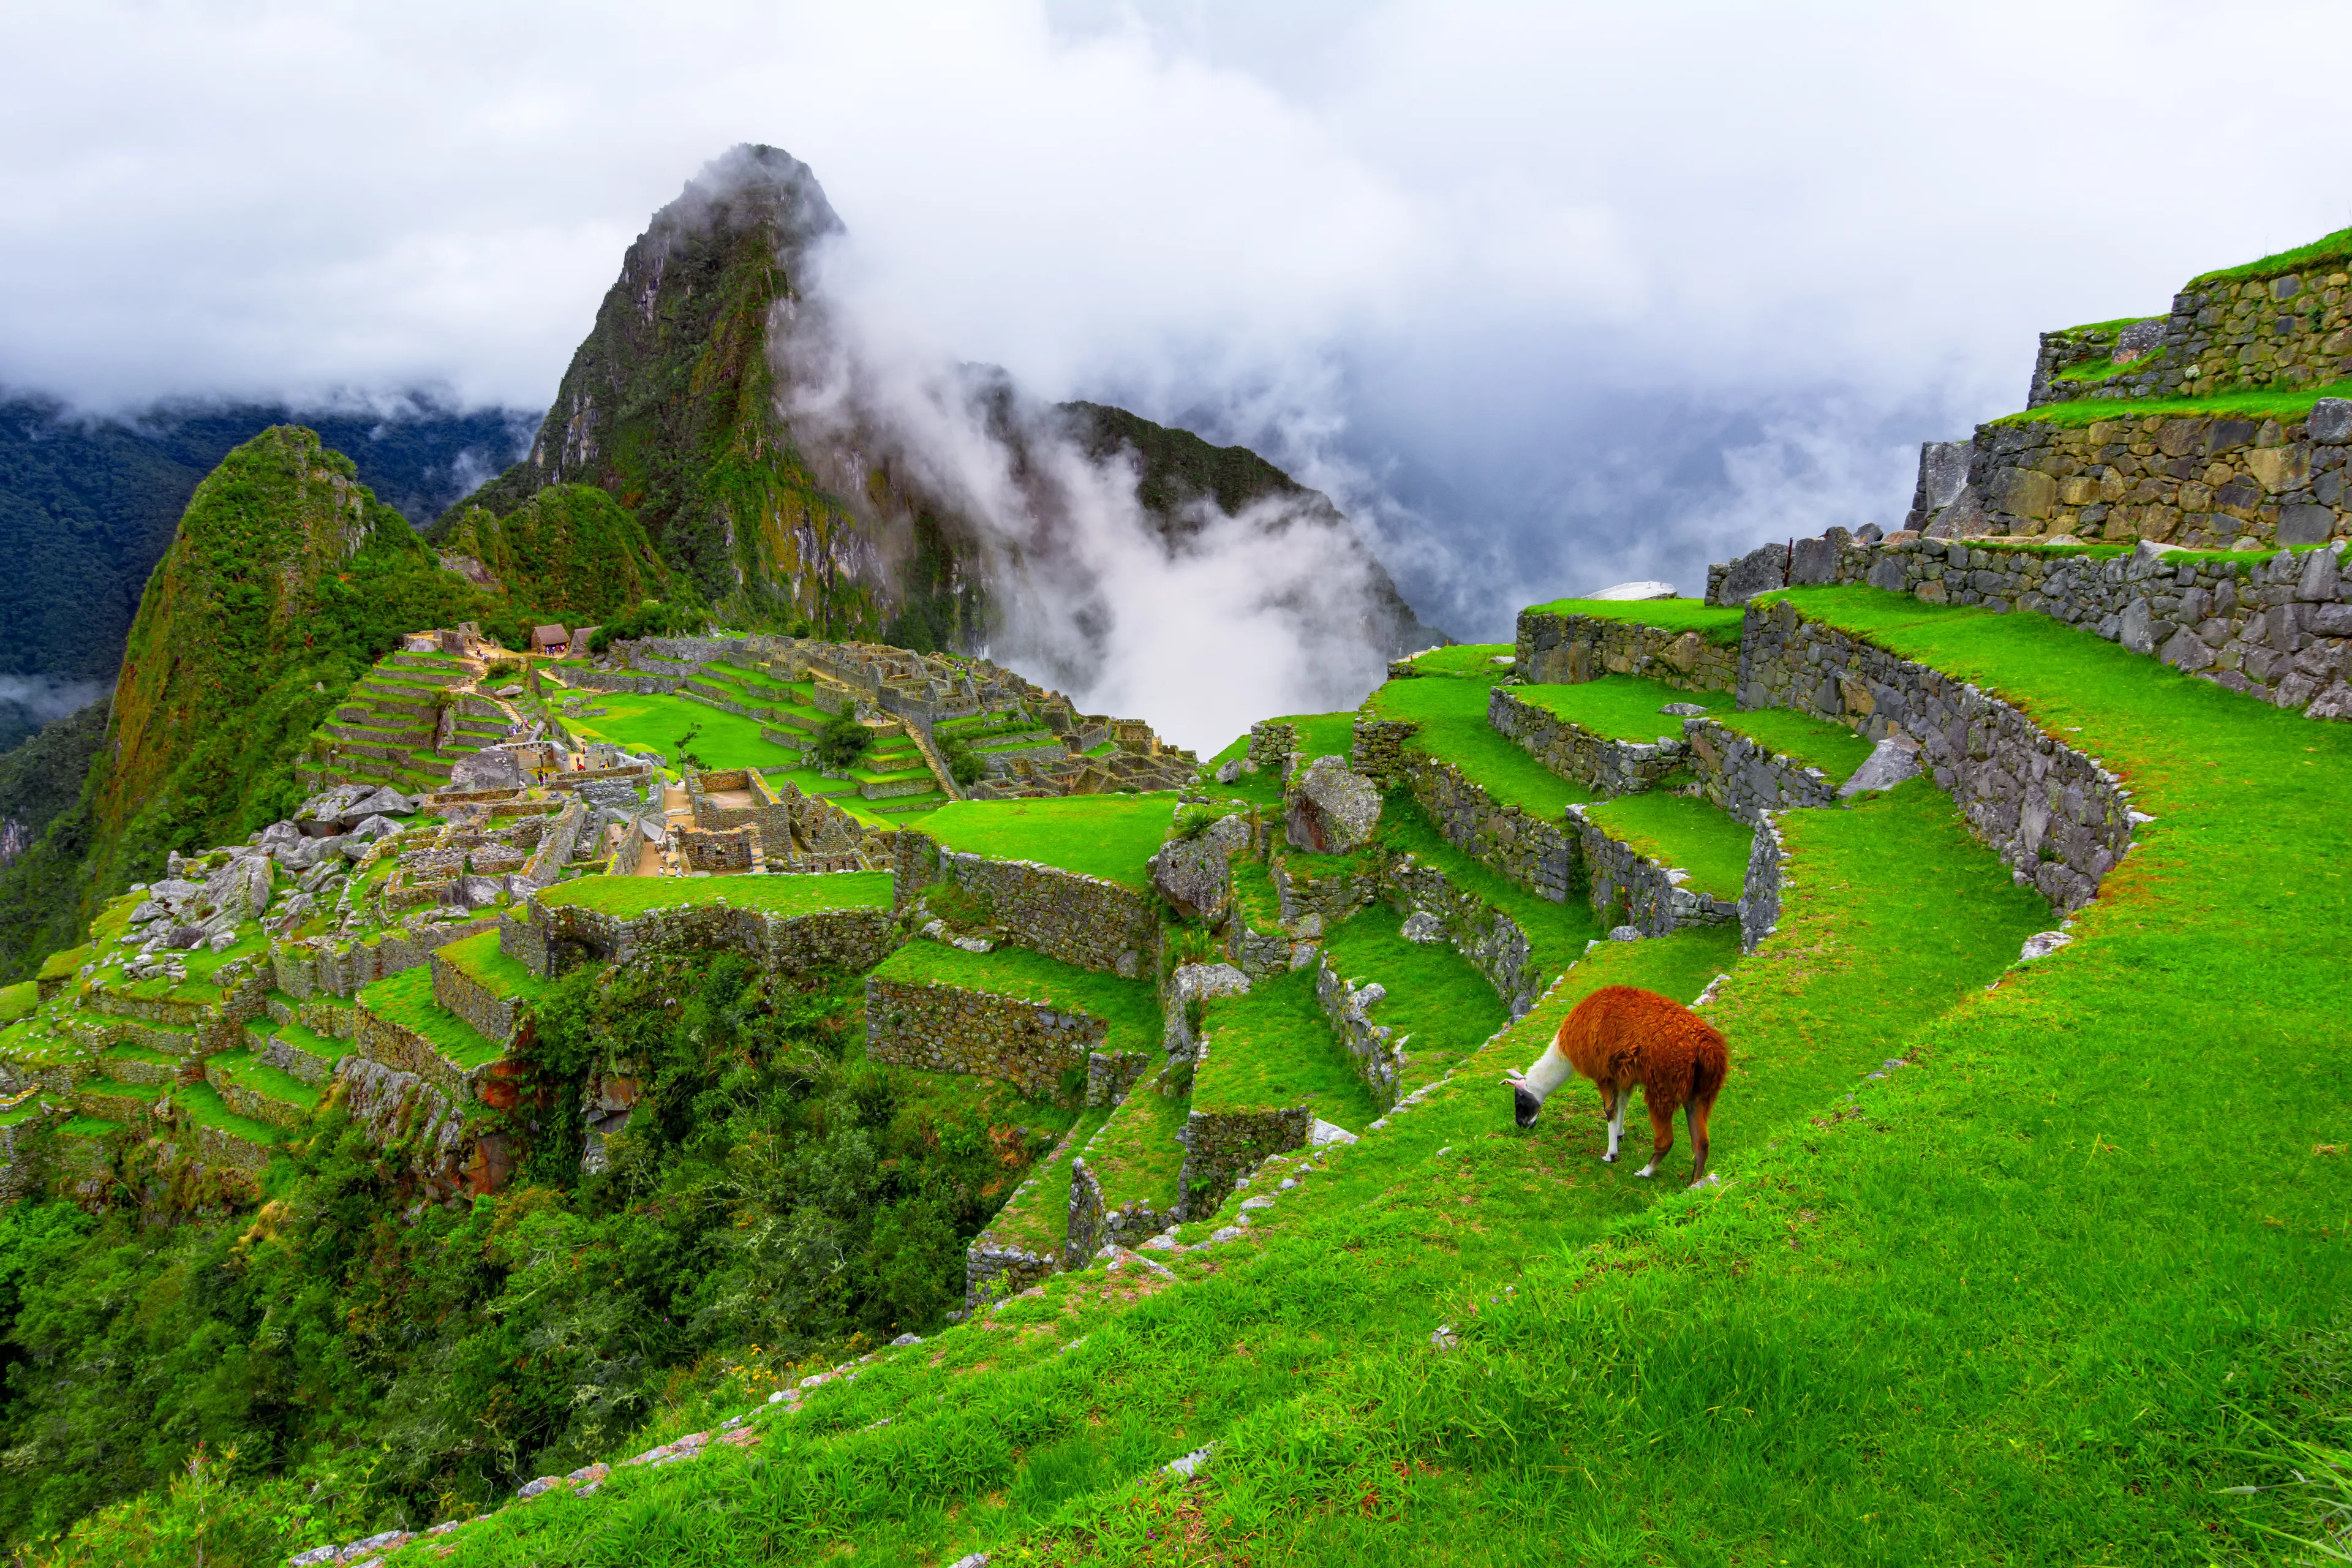 Overview of the lost inca city with Wayna Picchu peak